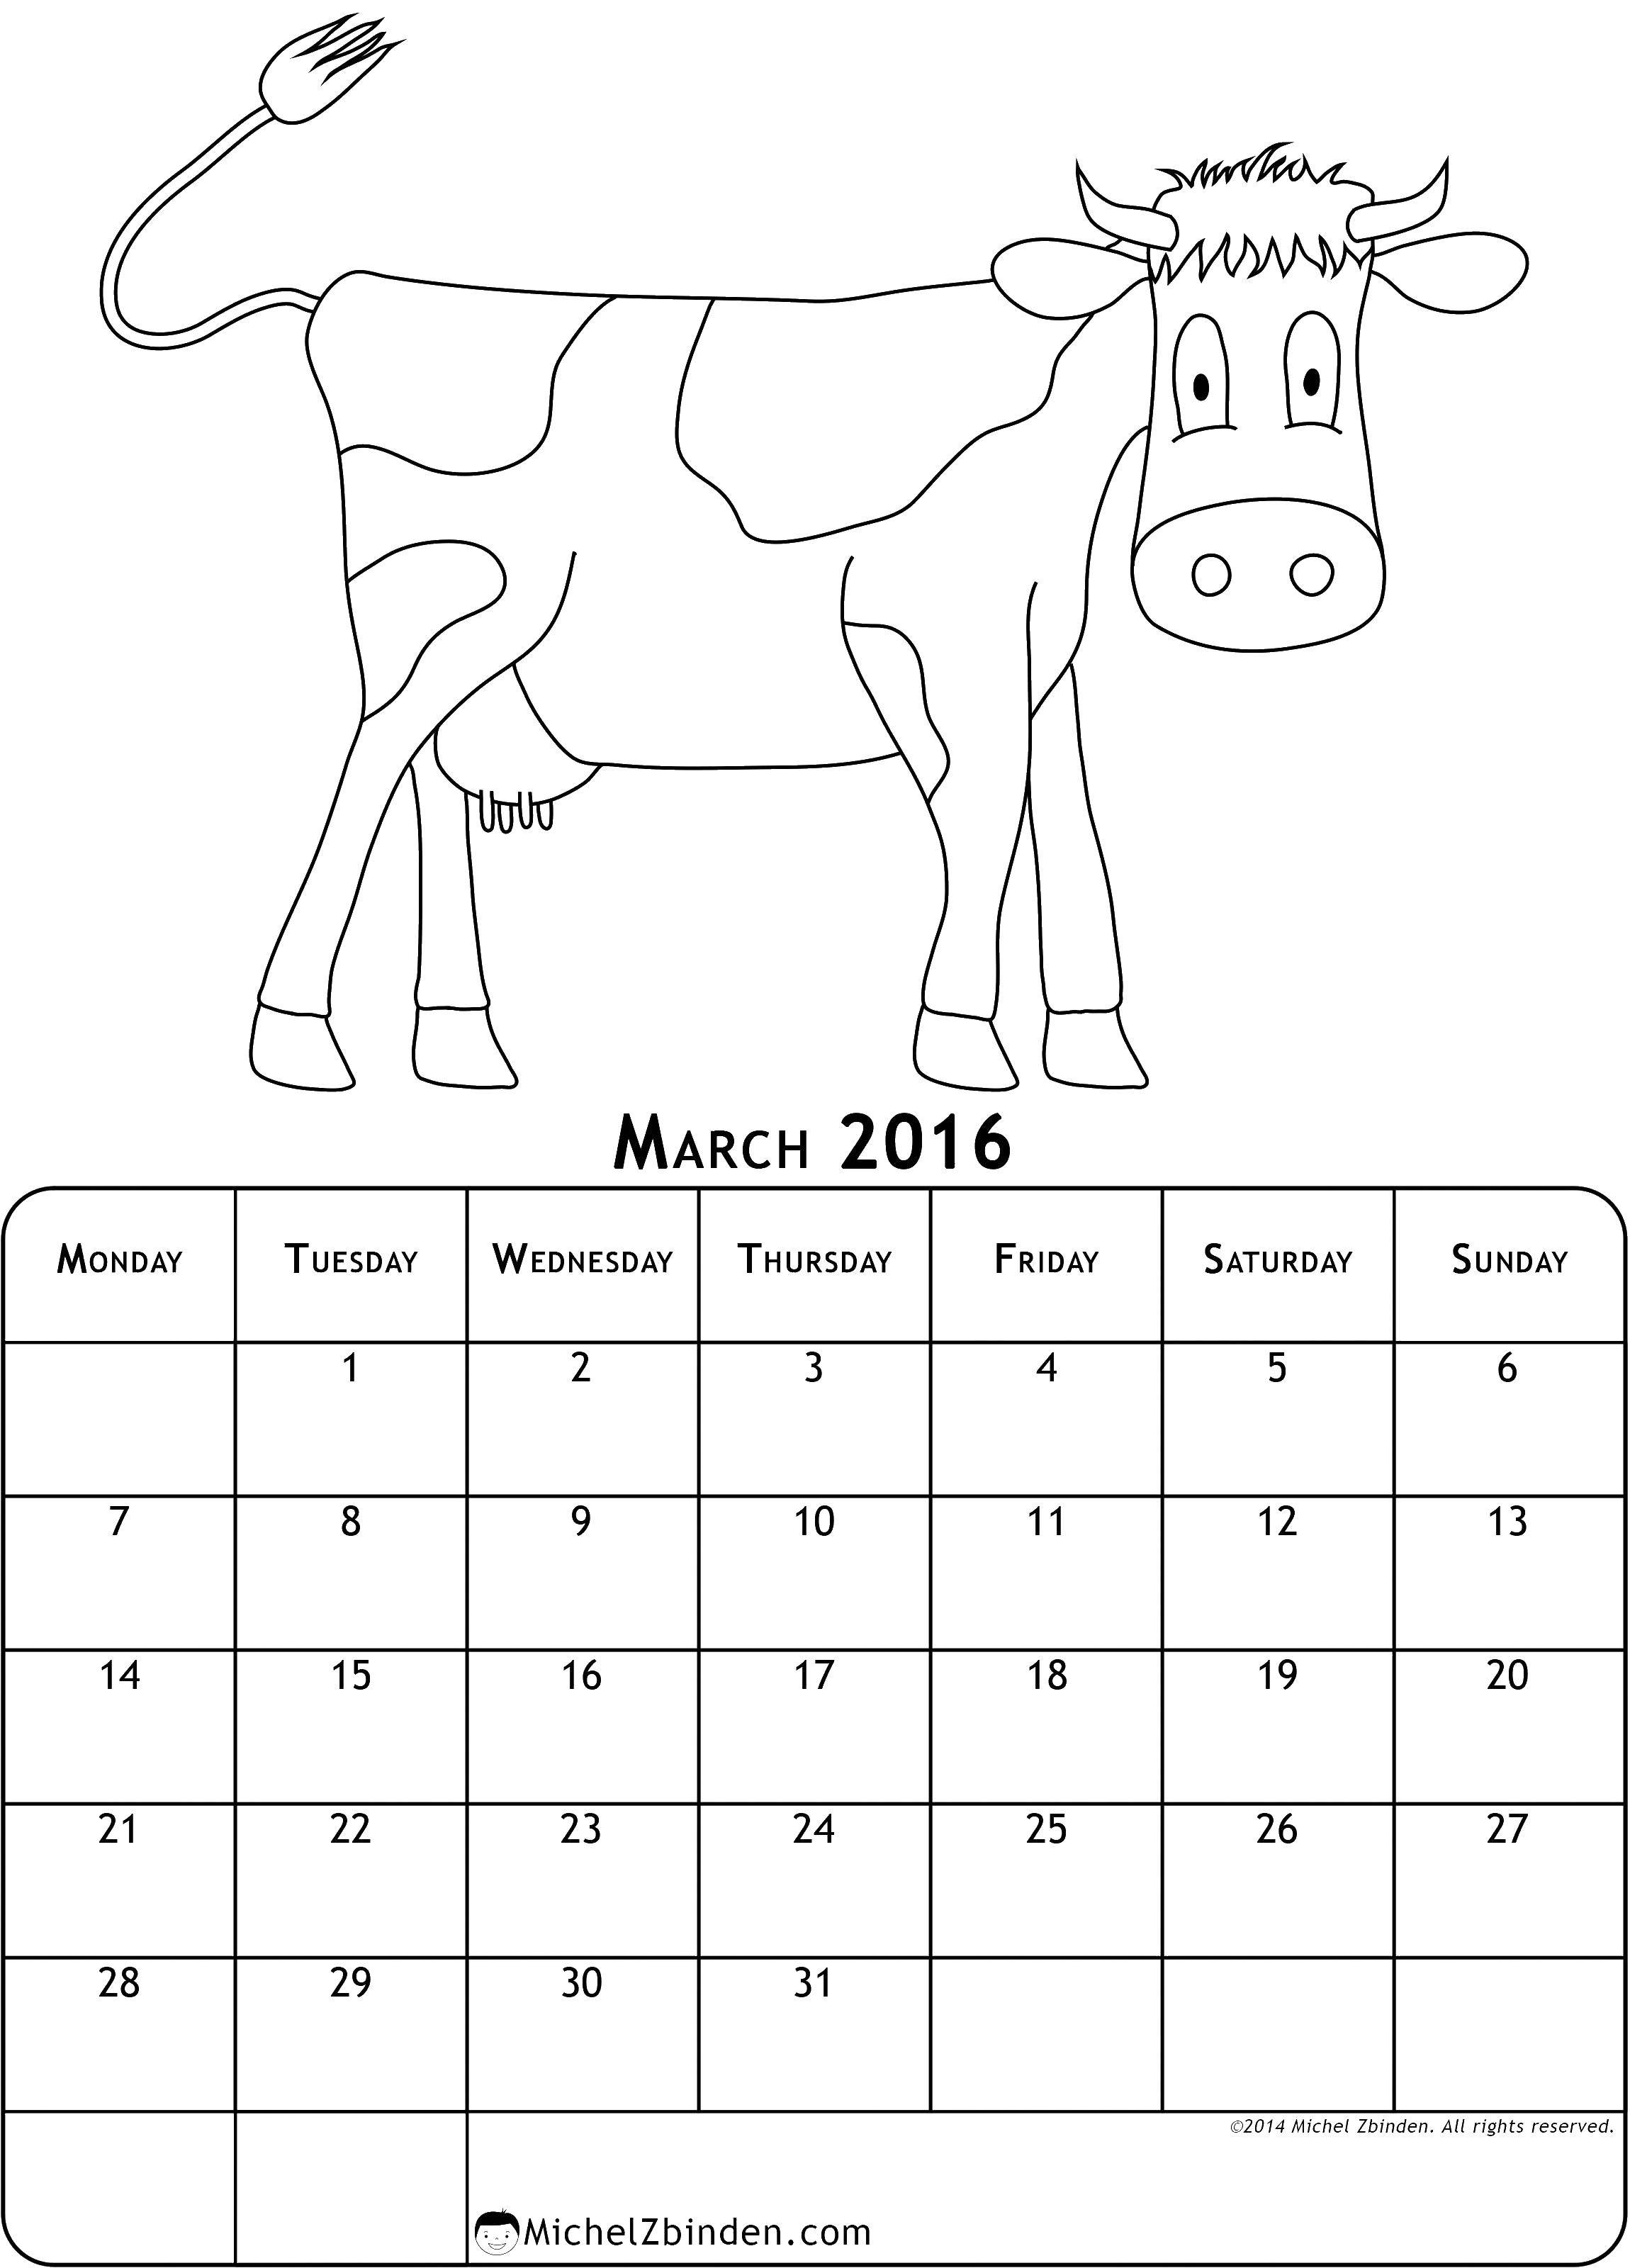 Coloring March and the cow. Category Calendar. Tags:  March, cow.